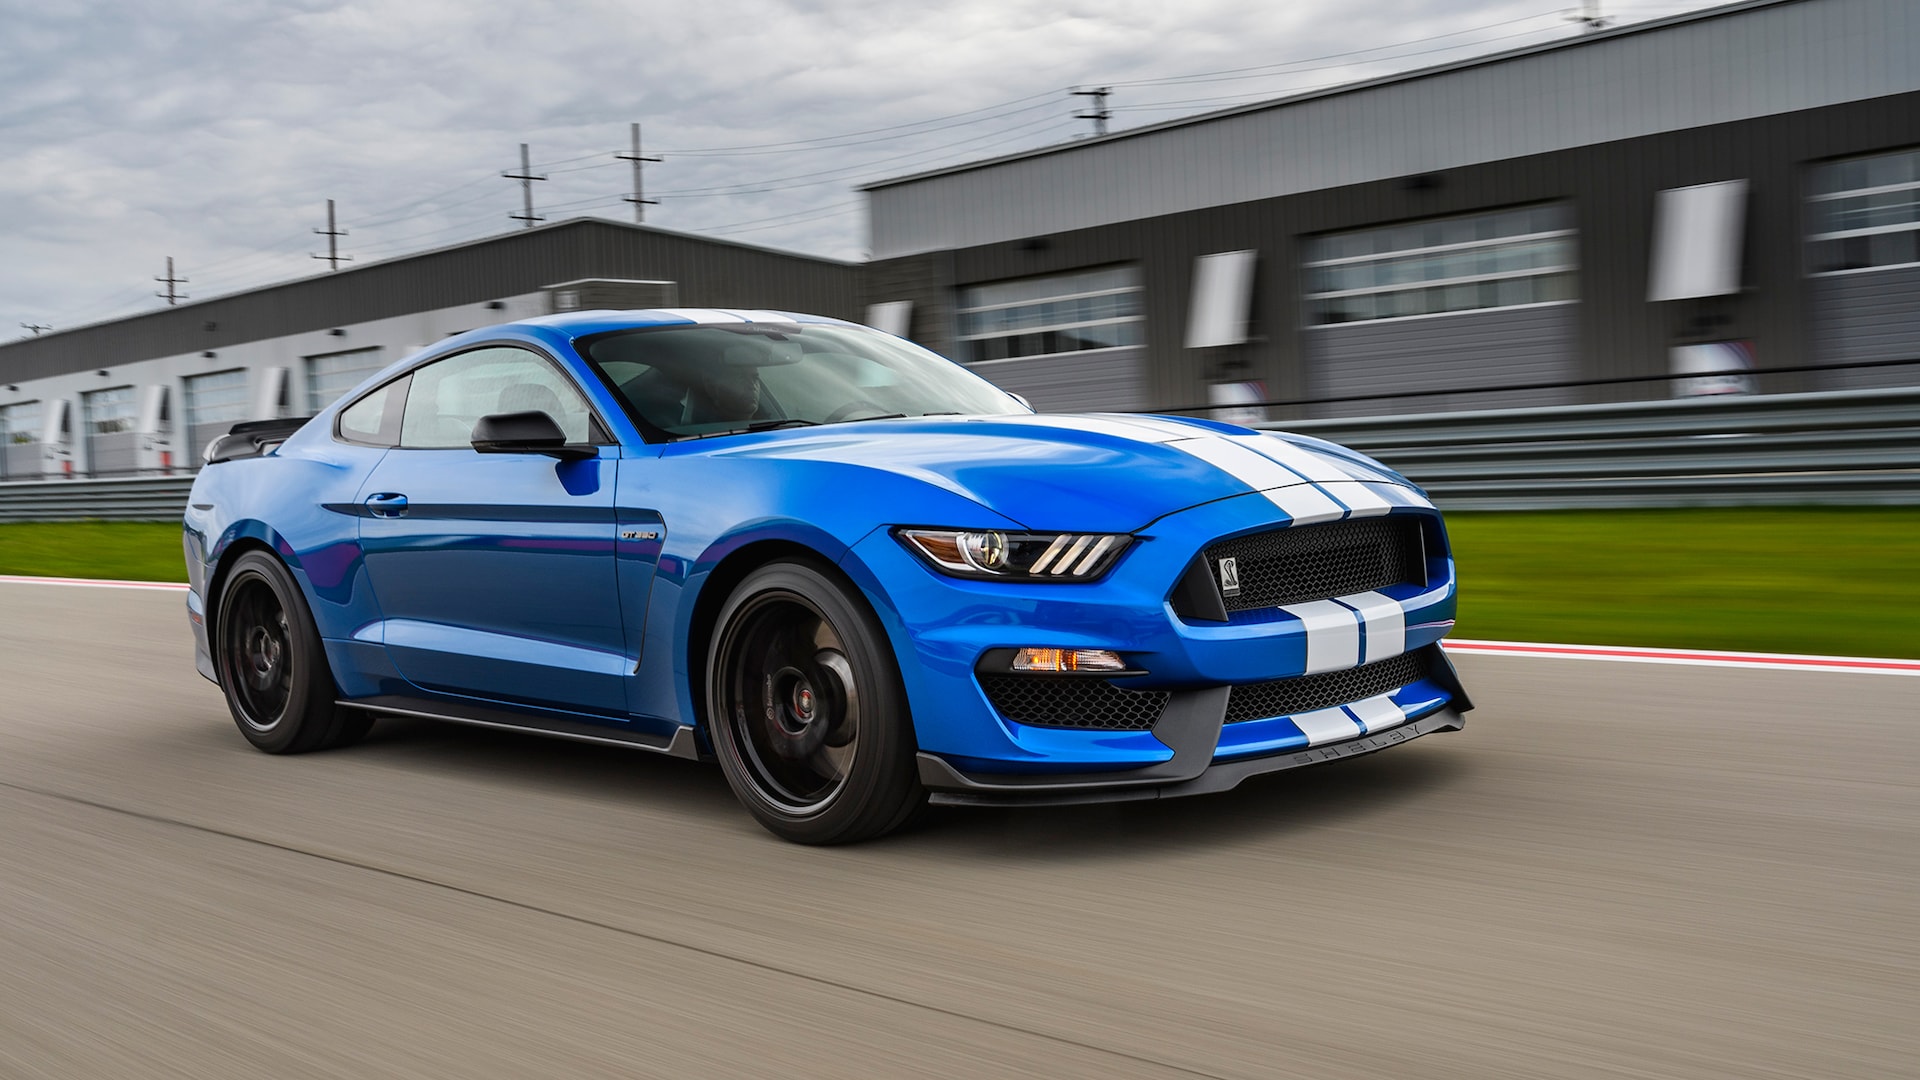 2019 Ford Mustang Shelby GT350 Driven: Don't You Forget About Me